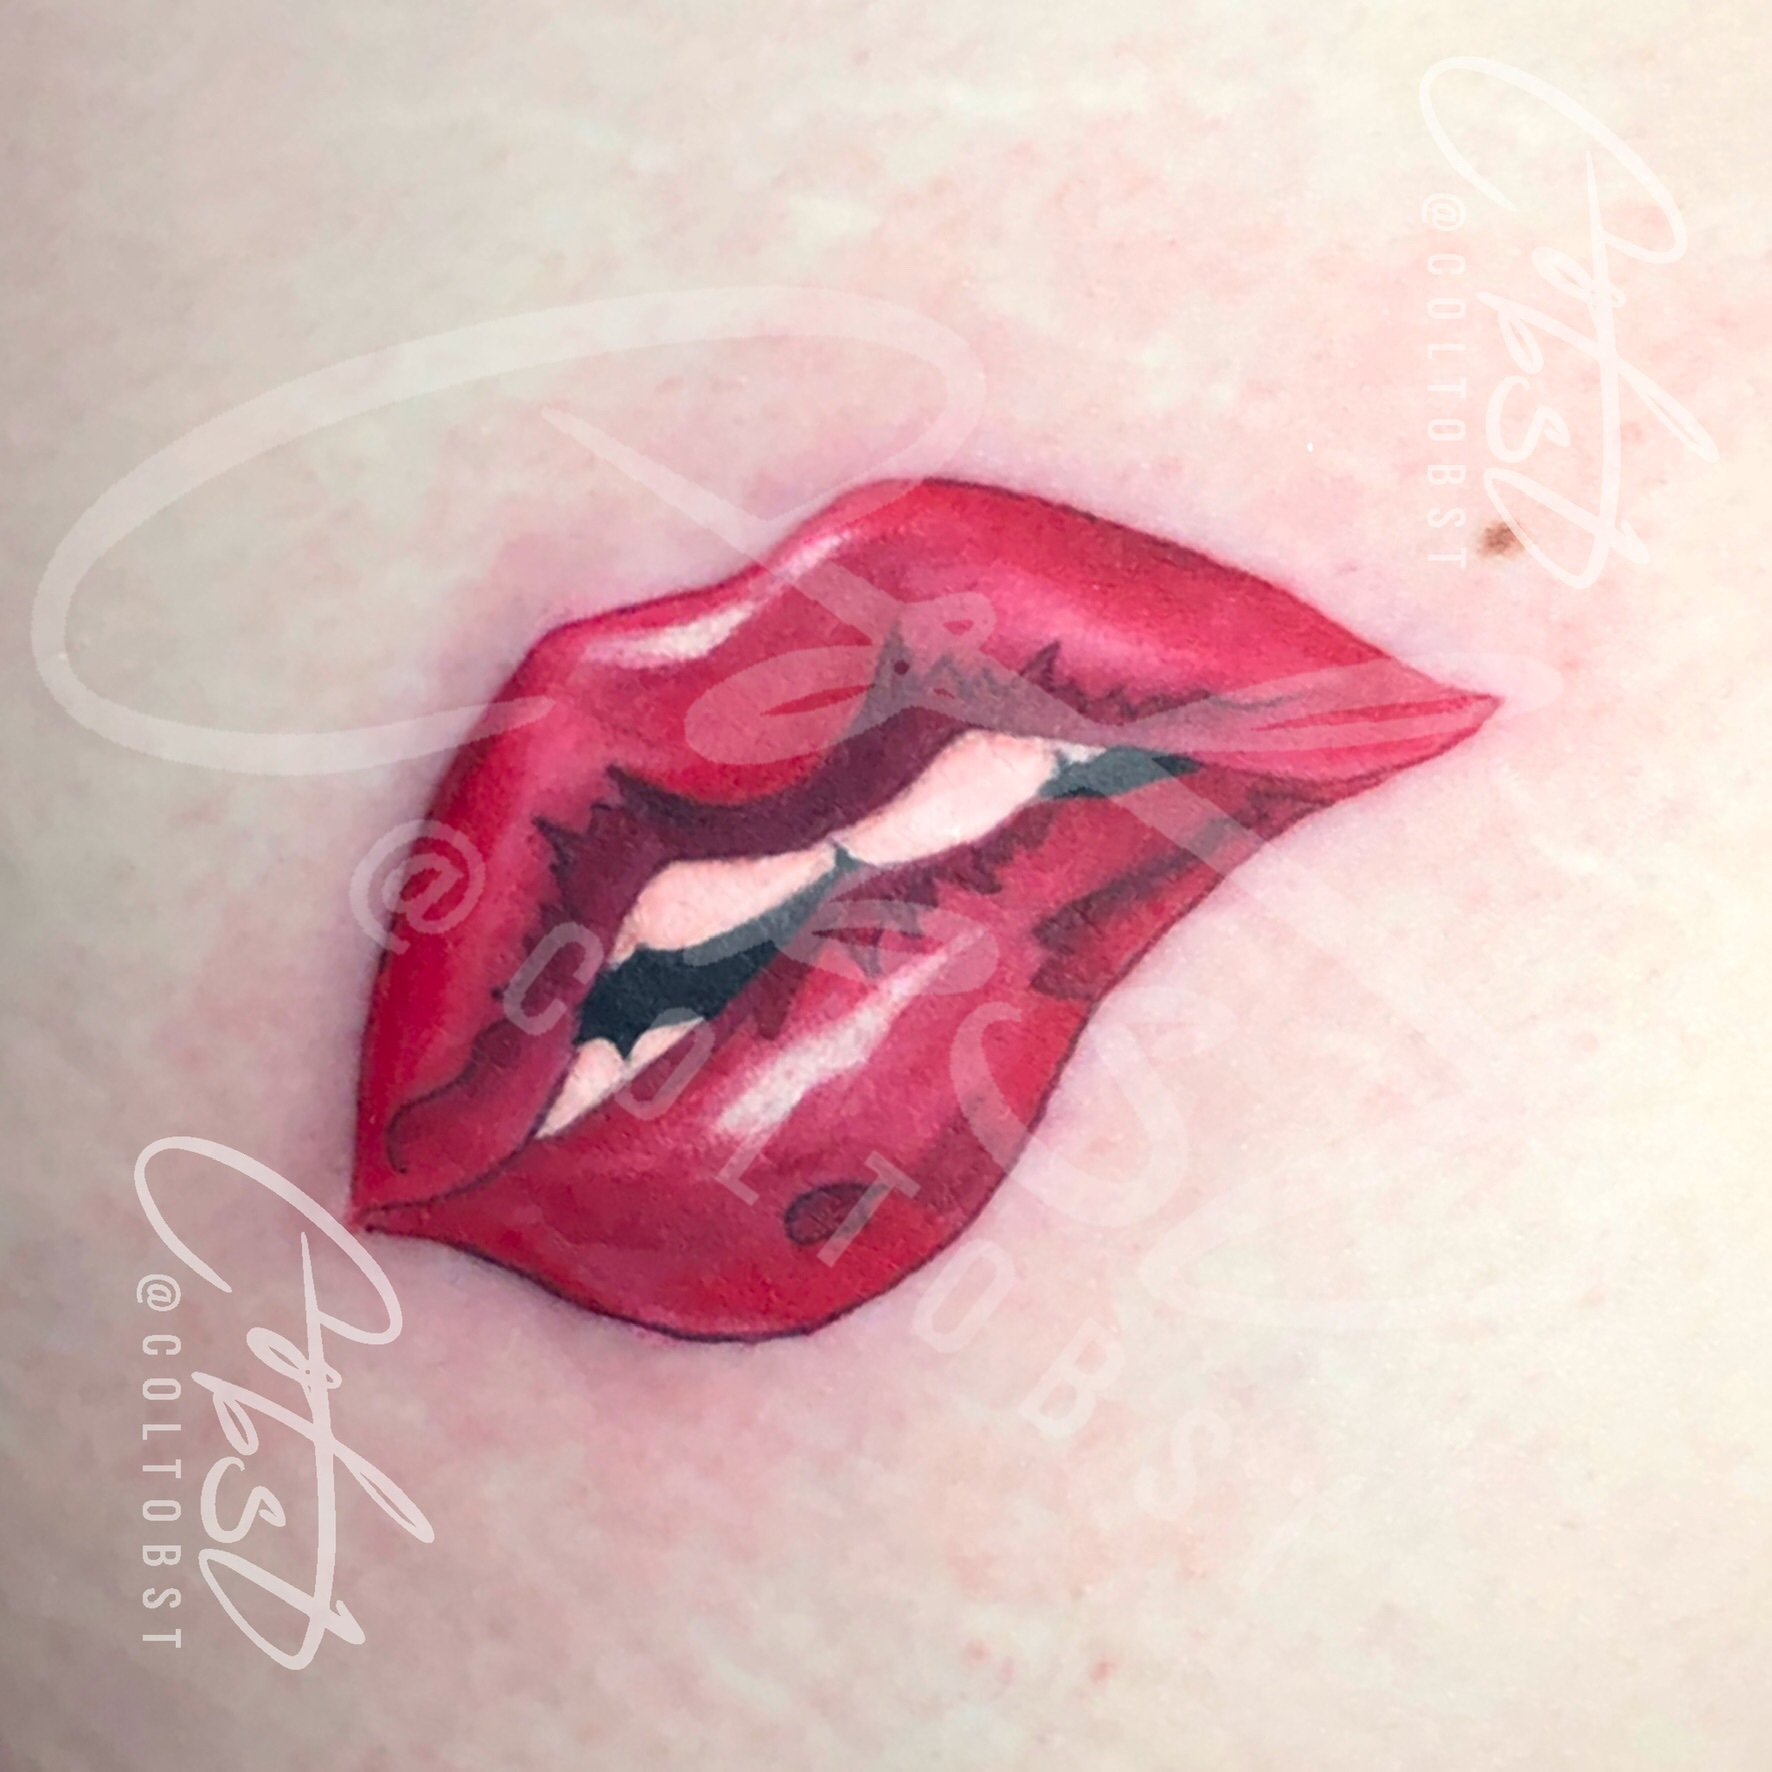 Lips Tattoo Meaning: Personal Stories and Symbolism Behind Body Art